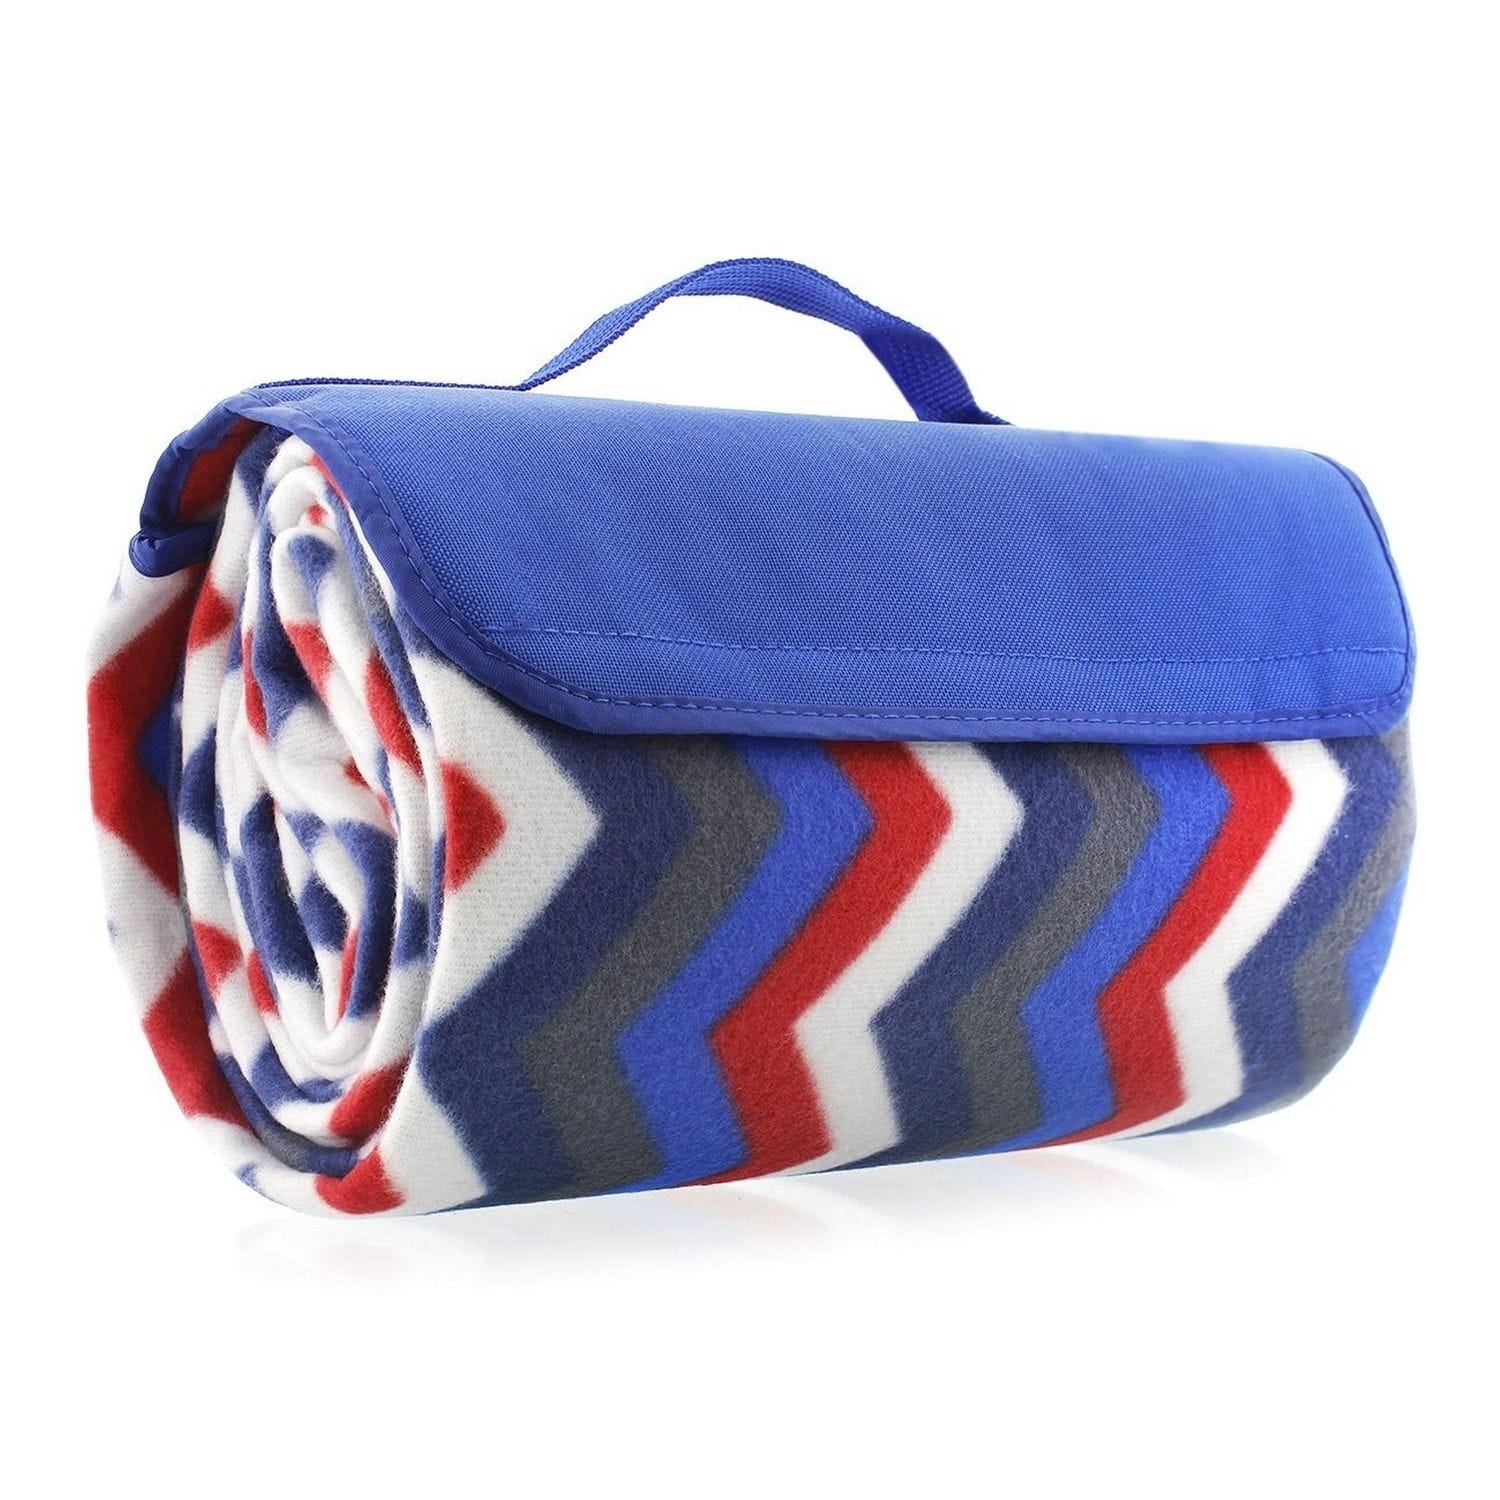 picnic travel rug with waterproof backing